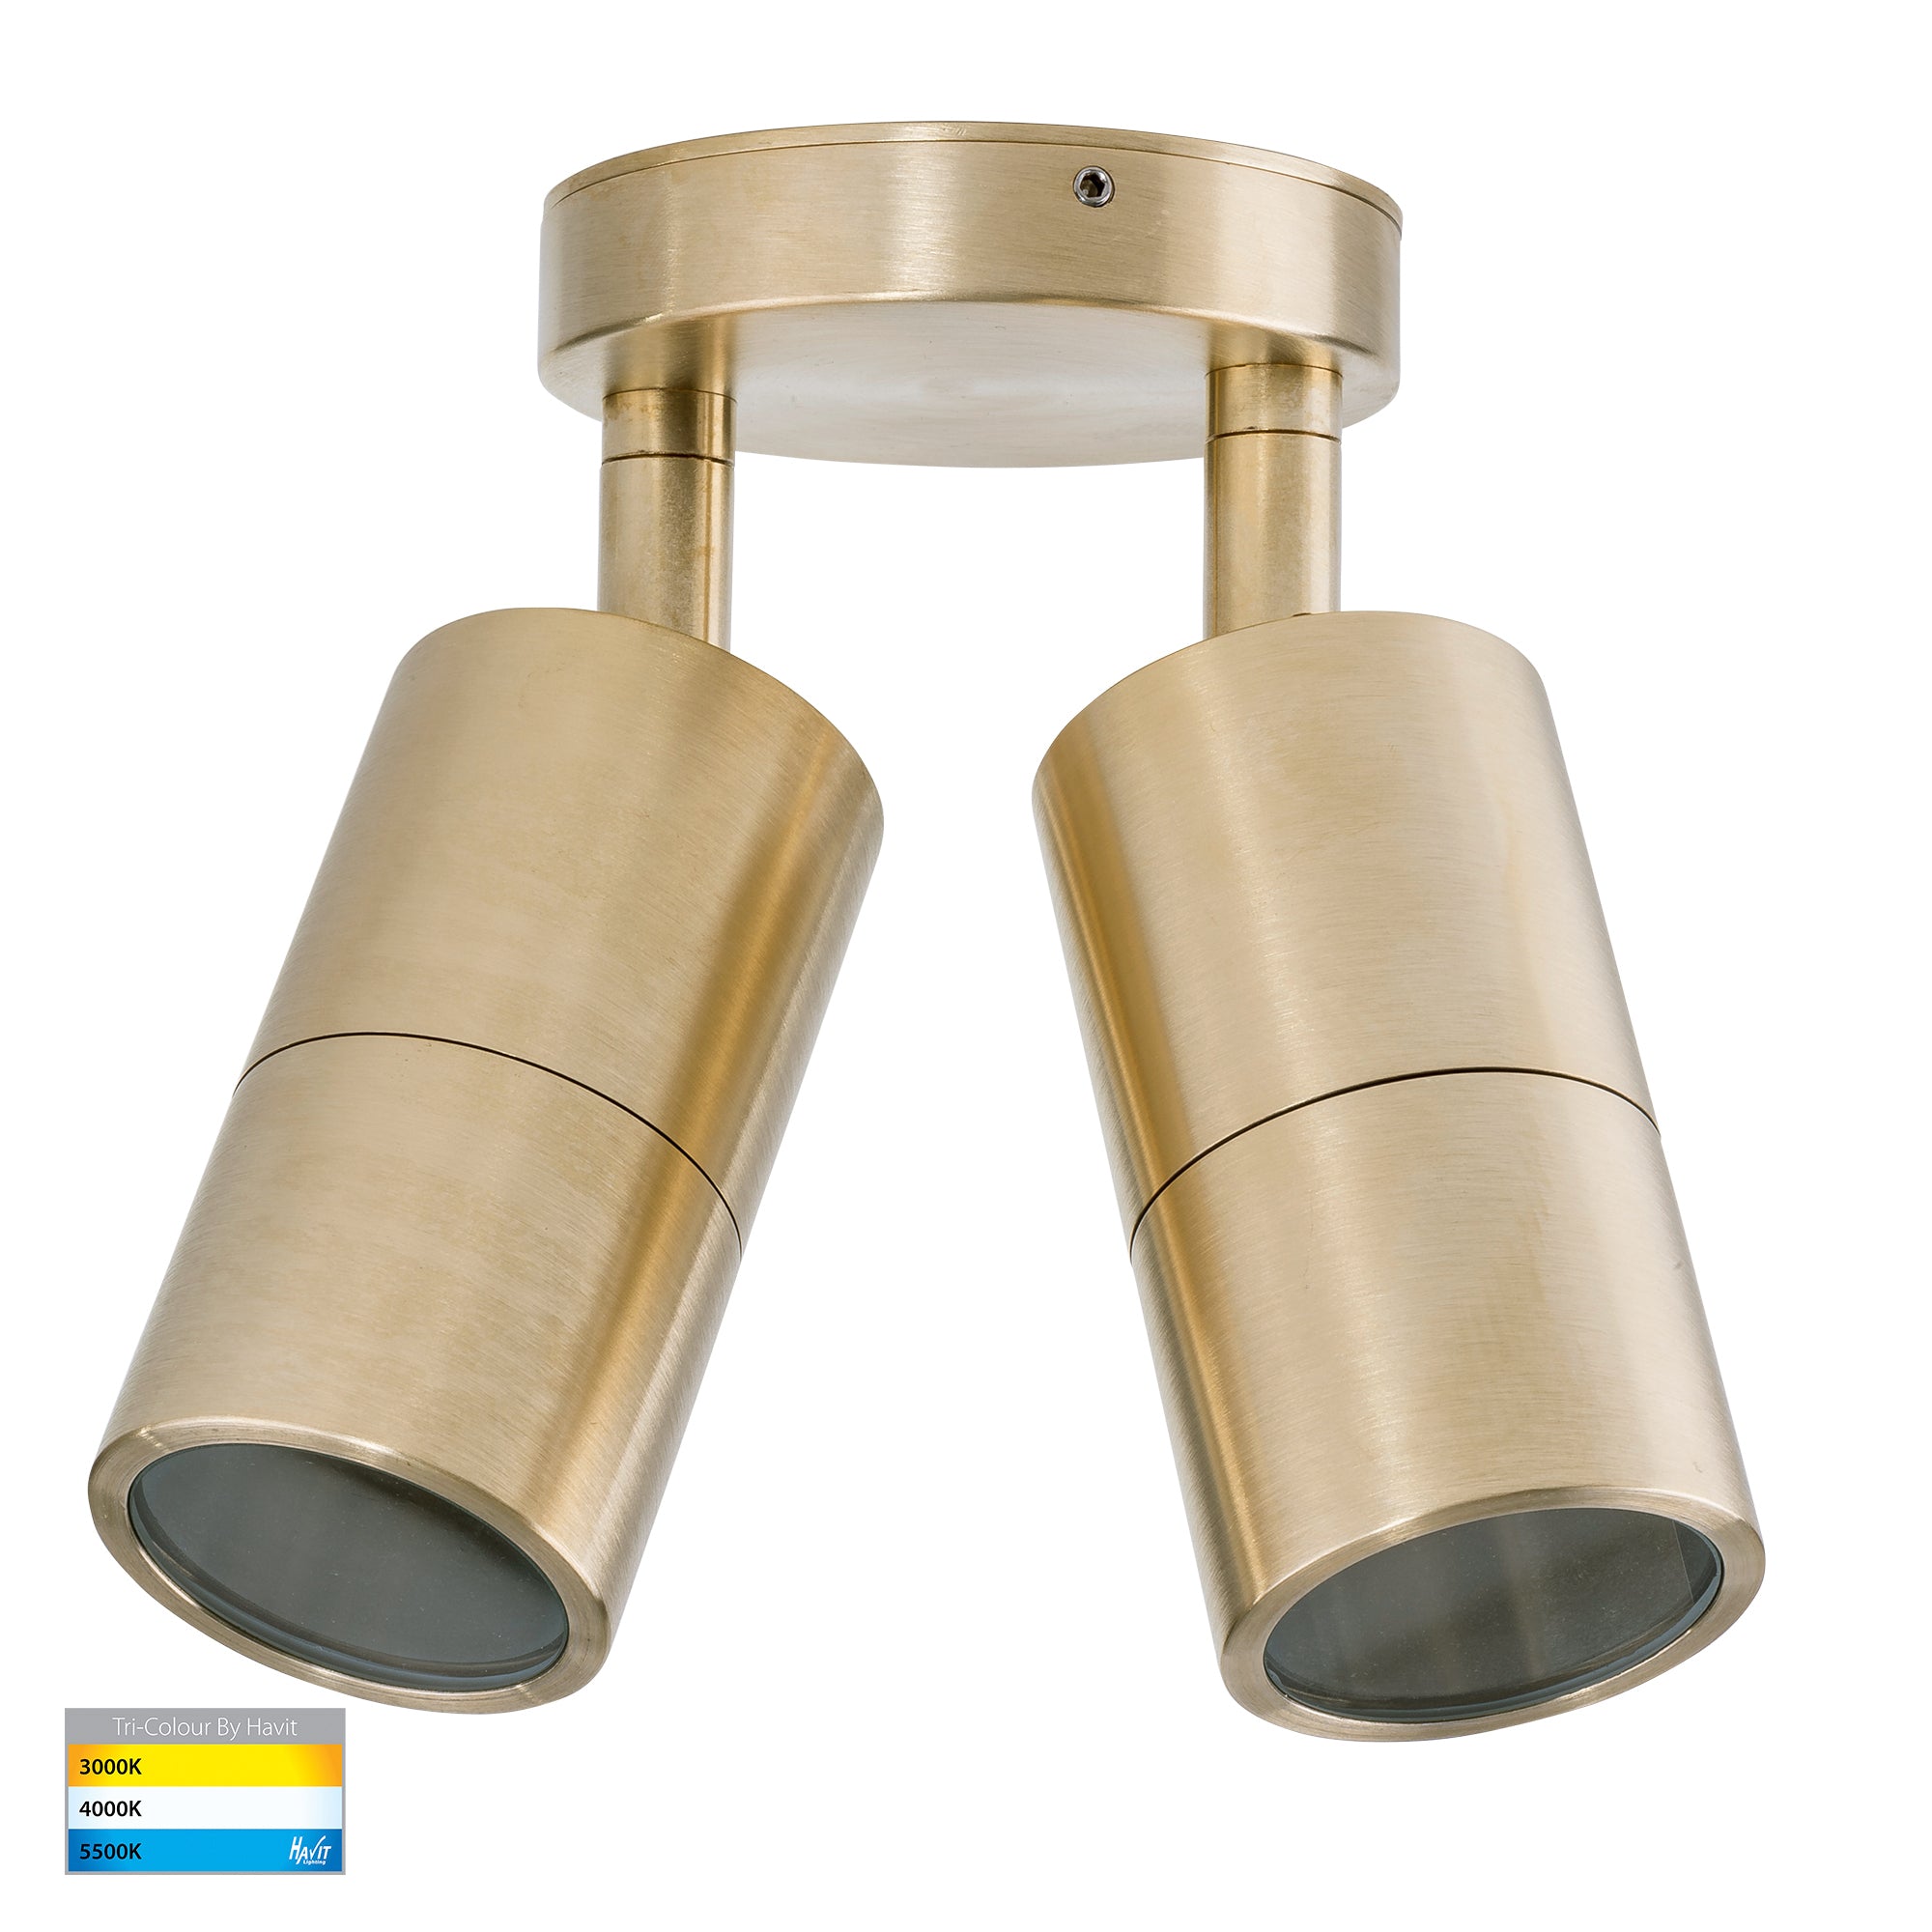 HV1355T-HV1357T - Tivah Solid Brass TRI Colour Double Adjustable Wall Pillar Lights